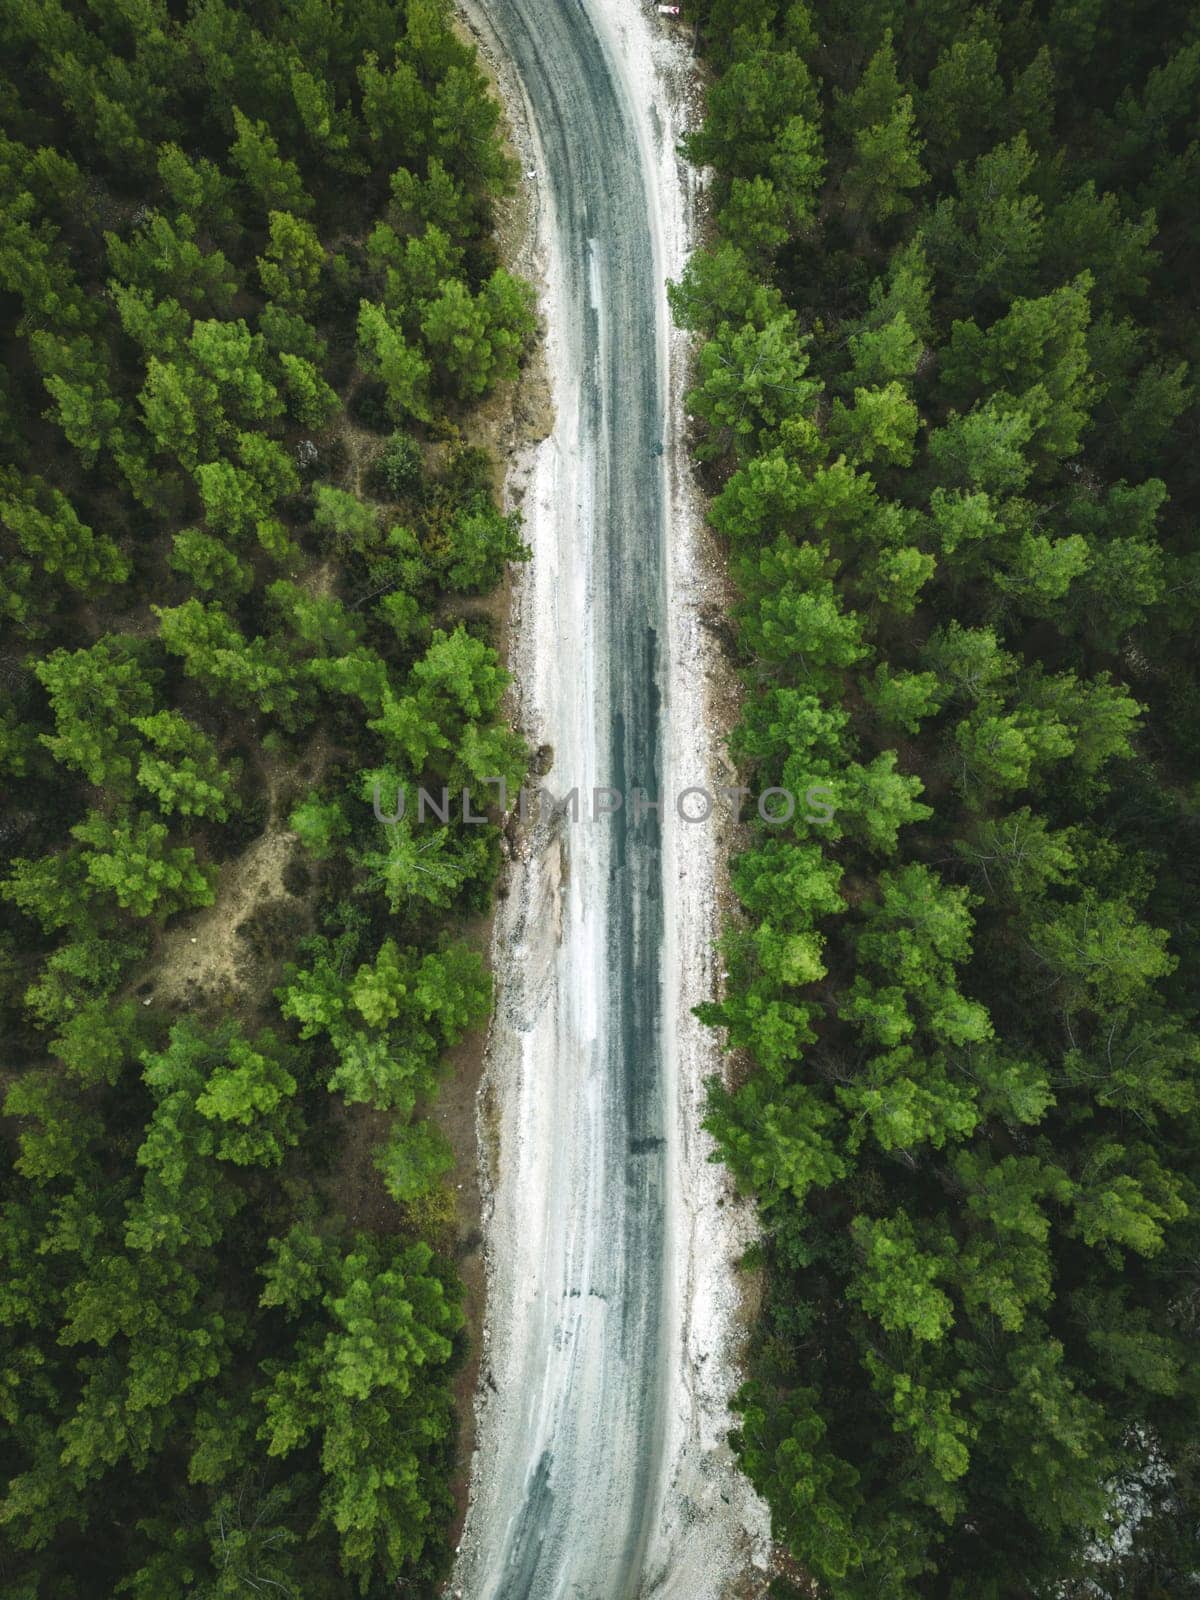 Aerial view of forest road with pine trees on both sides in autumn by Sonat